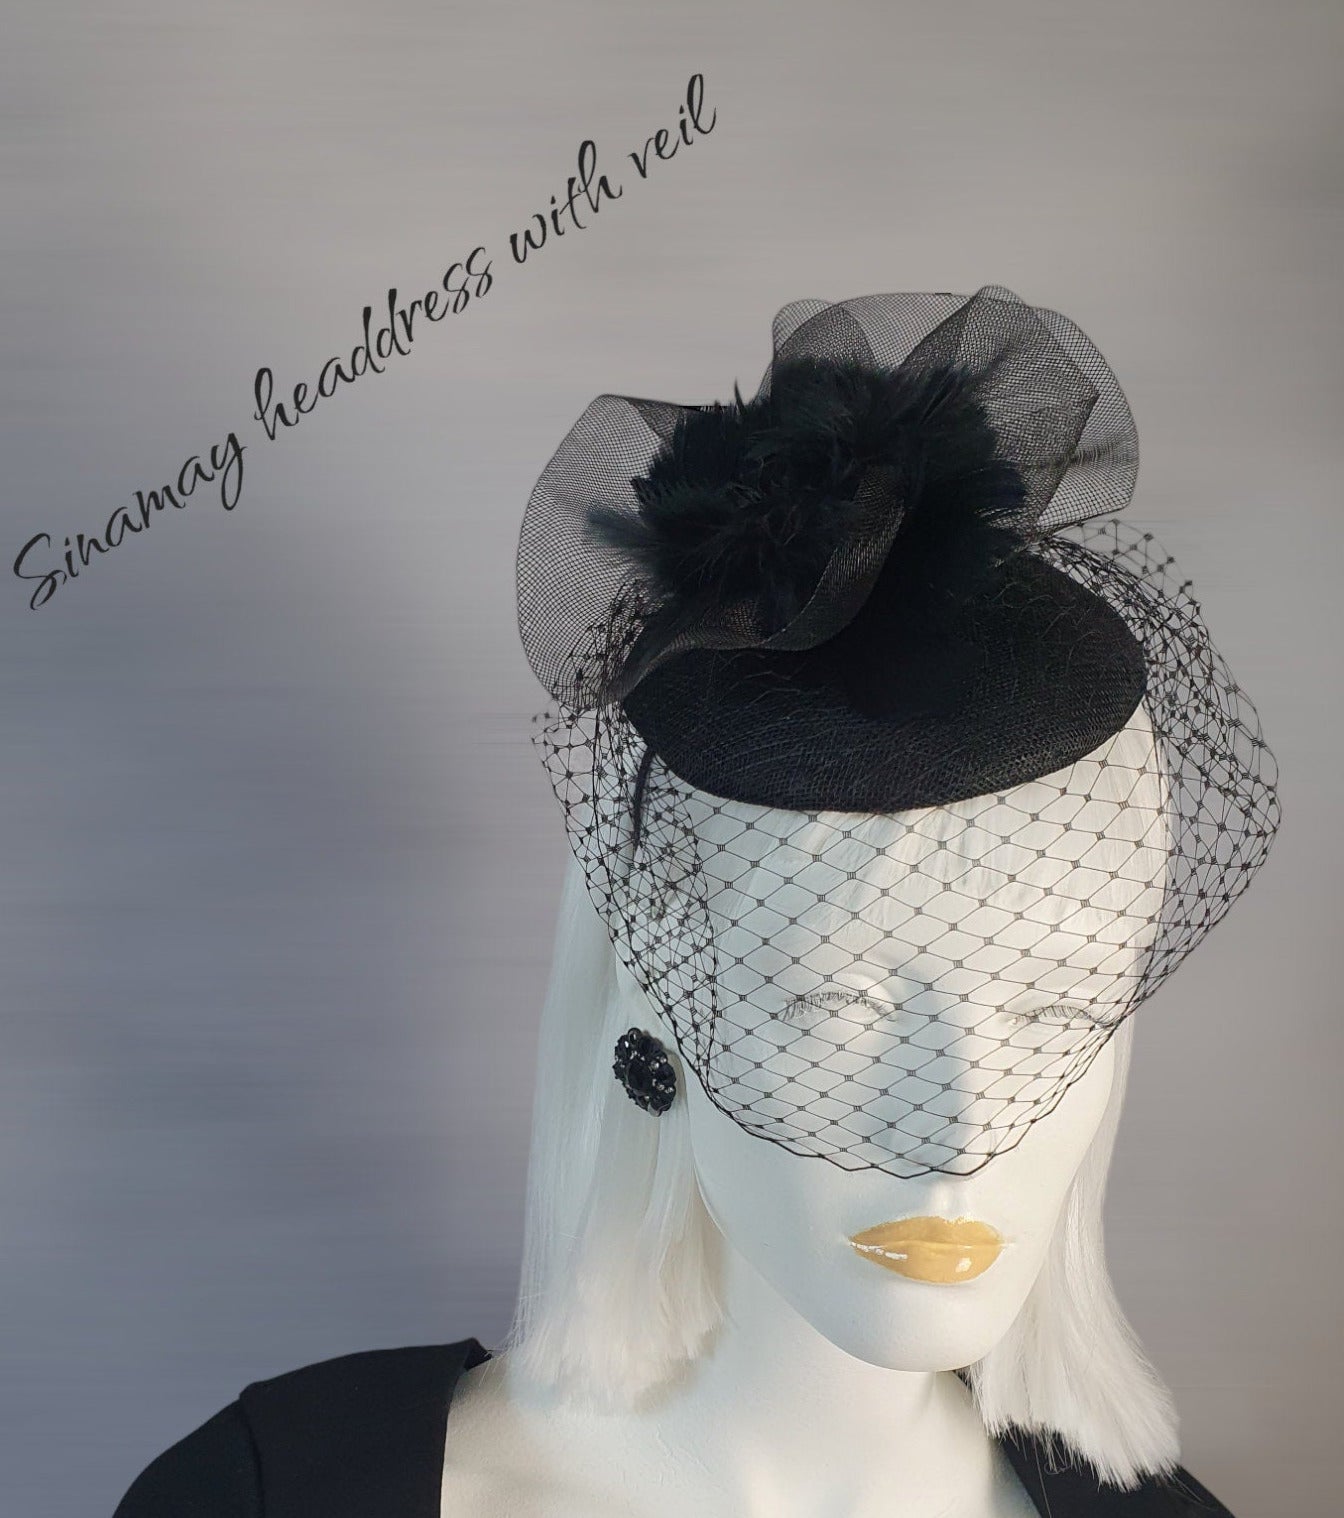 Black fascinator handmade from sinamay, with crinoline rooster feathers and metal diadem, headdress - Perfect for festive occasions